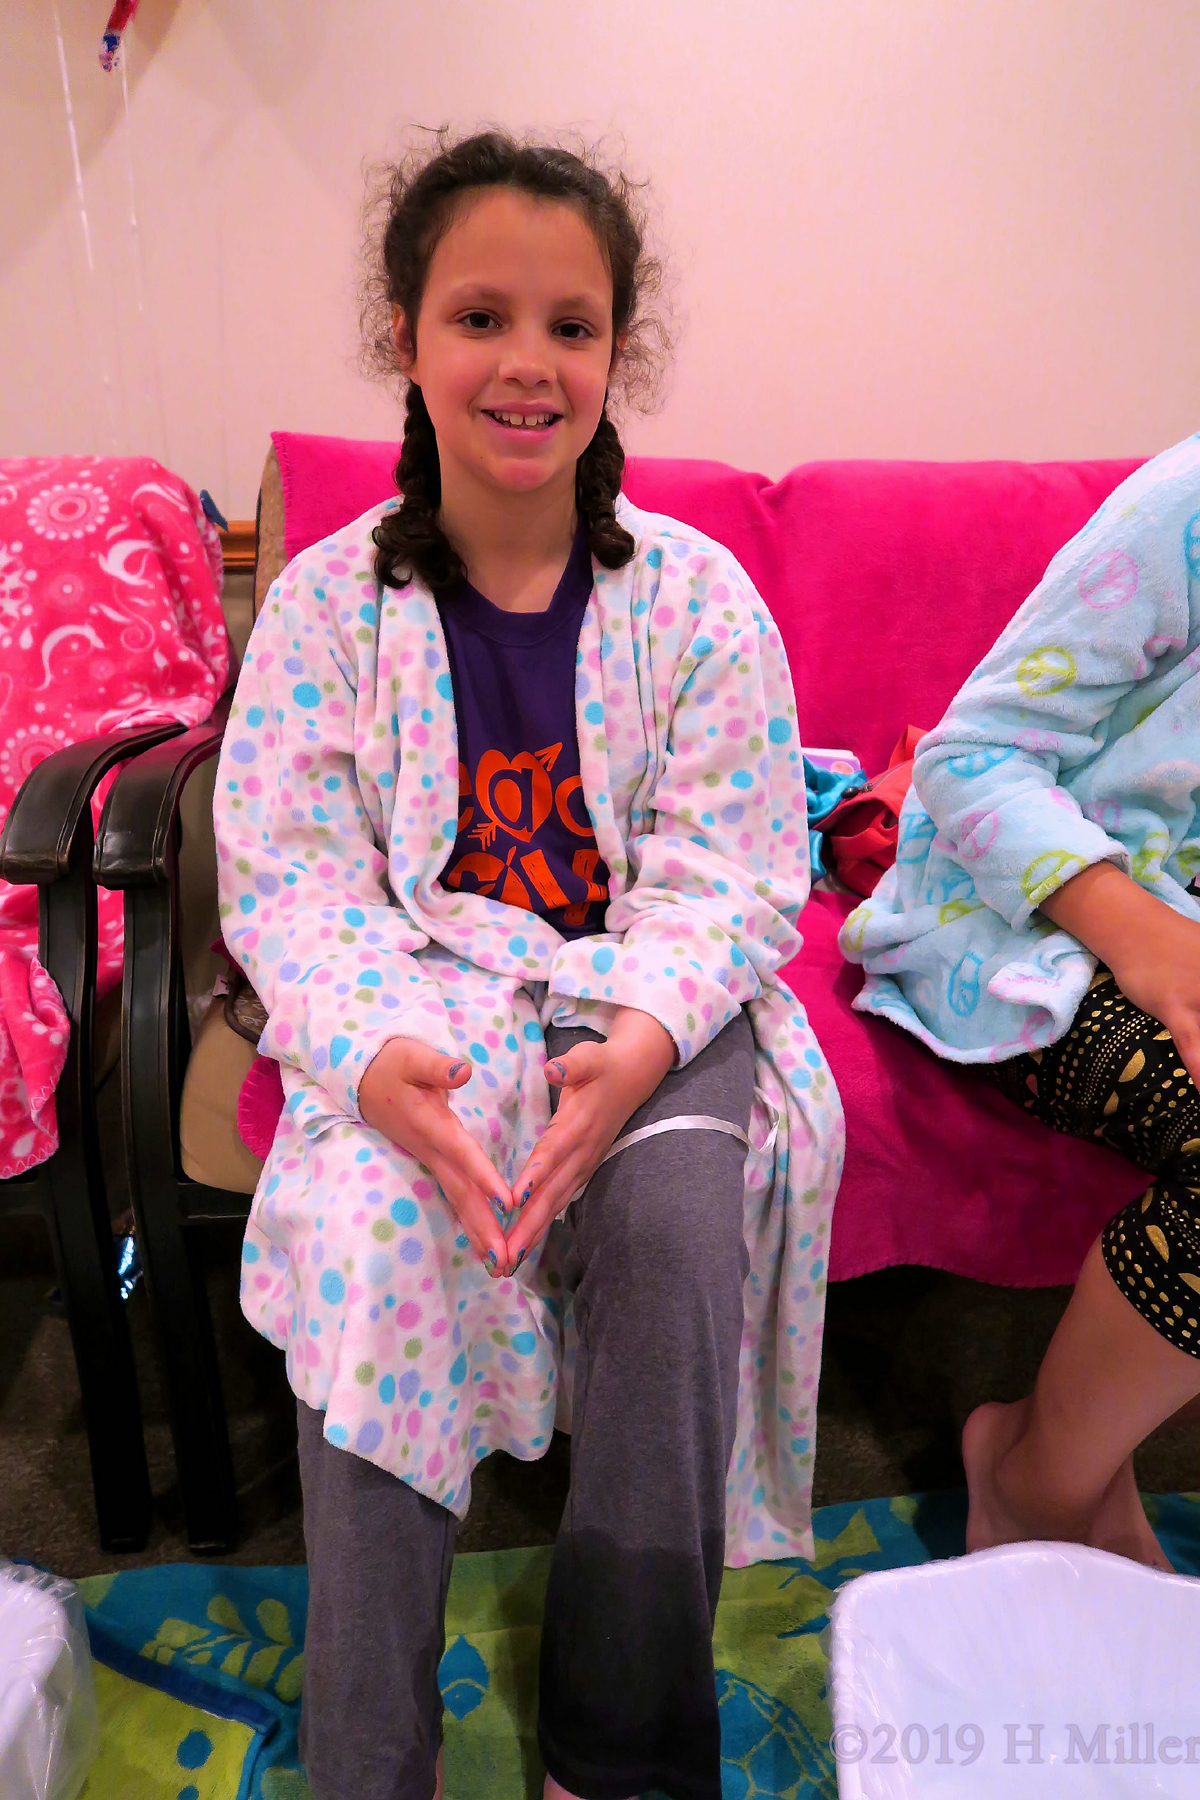 Spa Party Guest Smiles For The Camera During Pedicures For Girls!